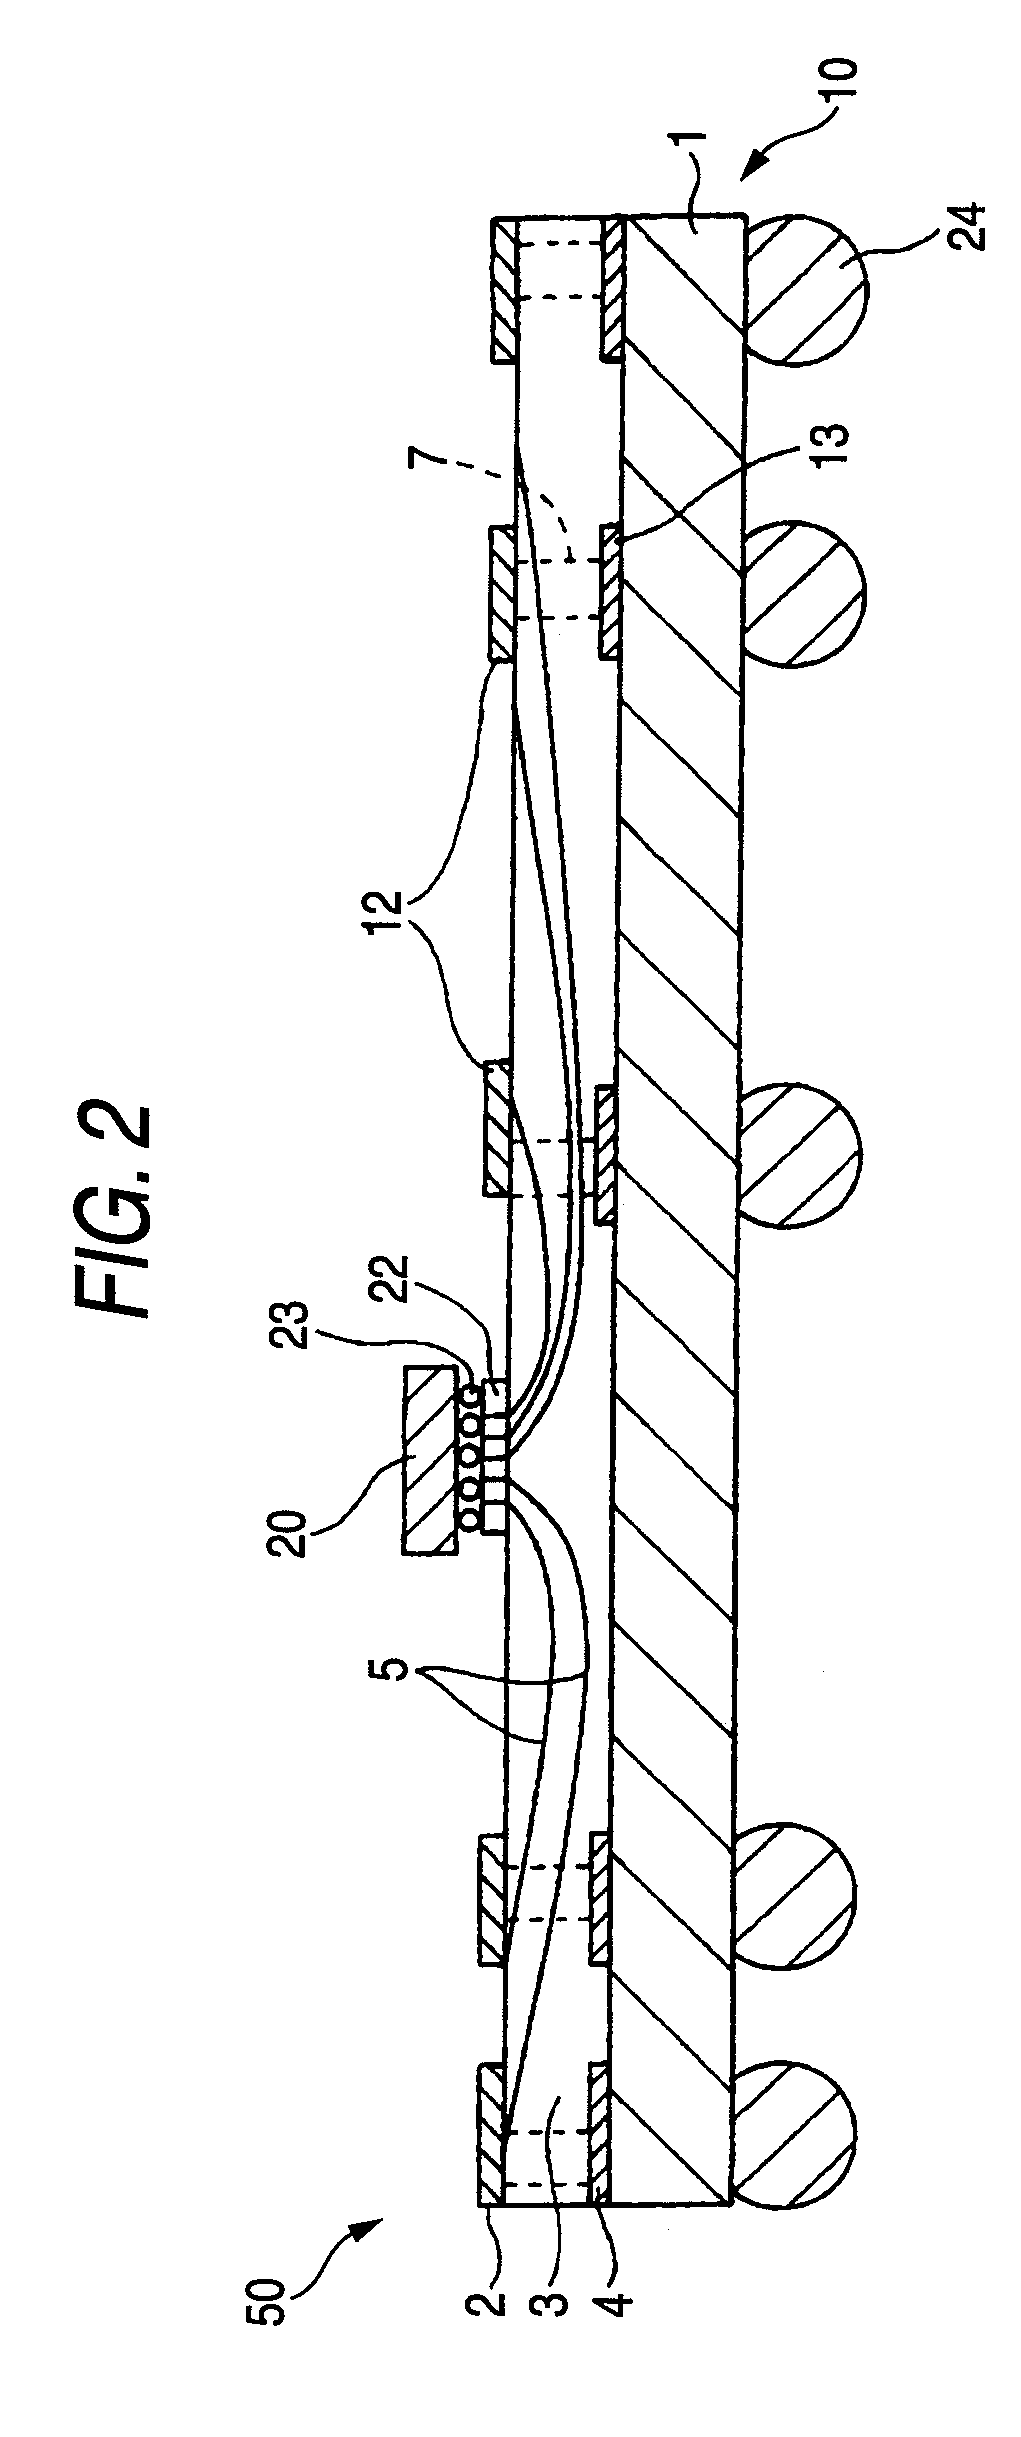 Multilayer wiring substrate, method of manufacturing the same, and semiconductor device